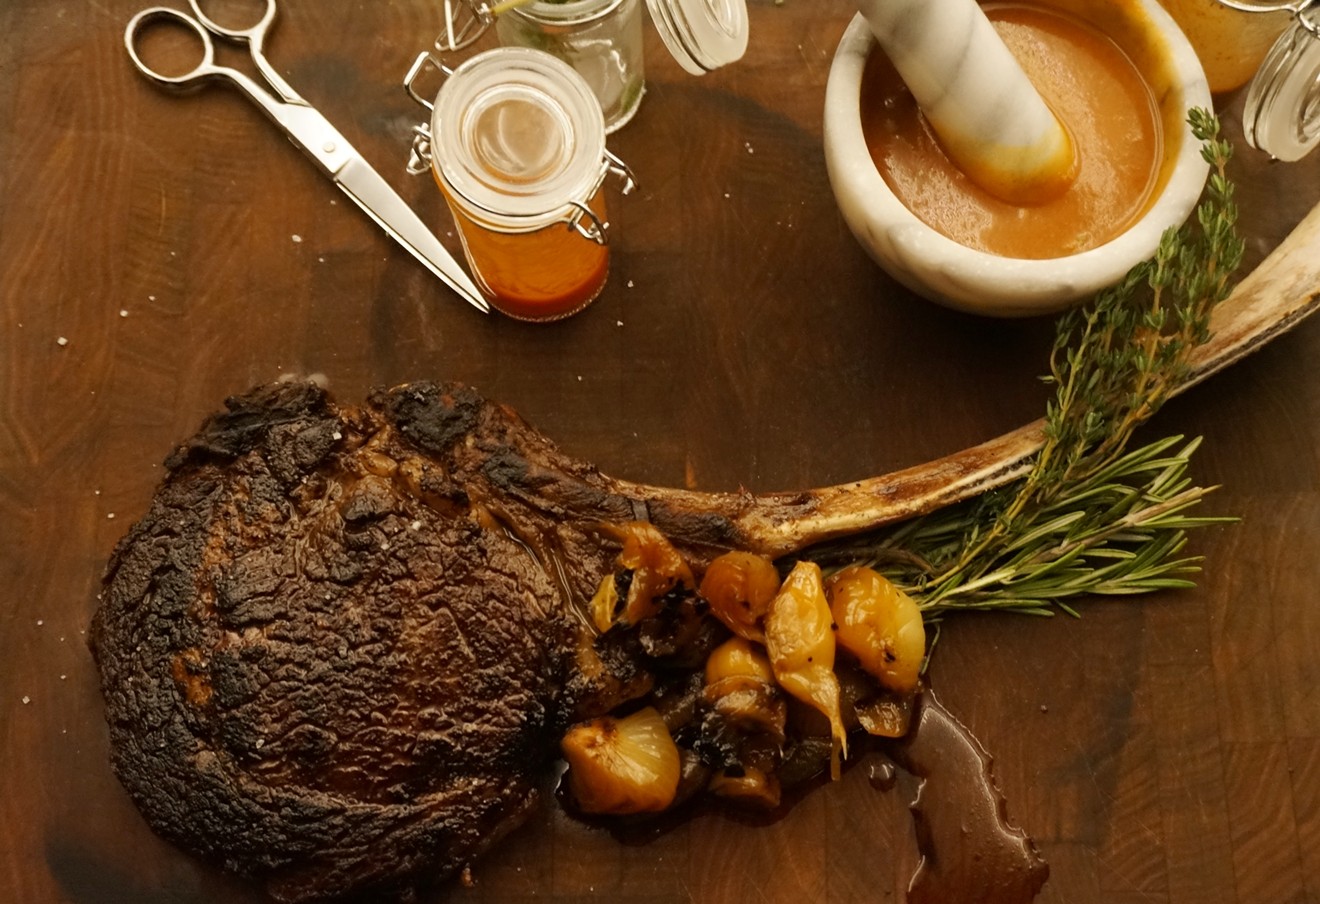 Quality Italian's tomahawk ribsteak comes with sauce prepared tableside with a mortar and pestle.